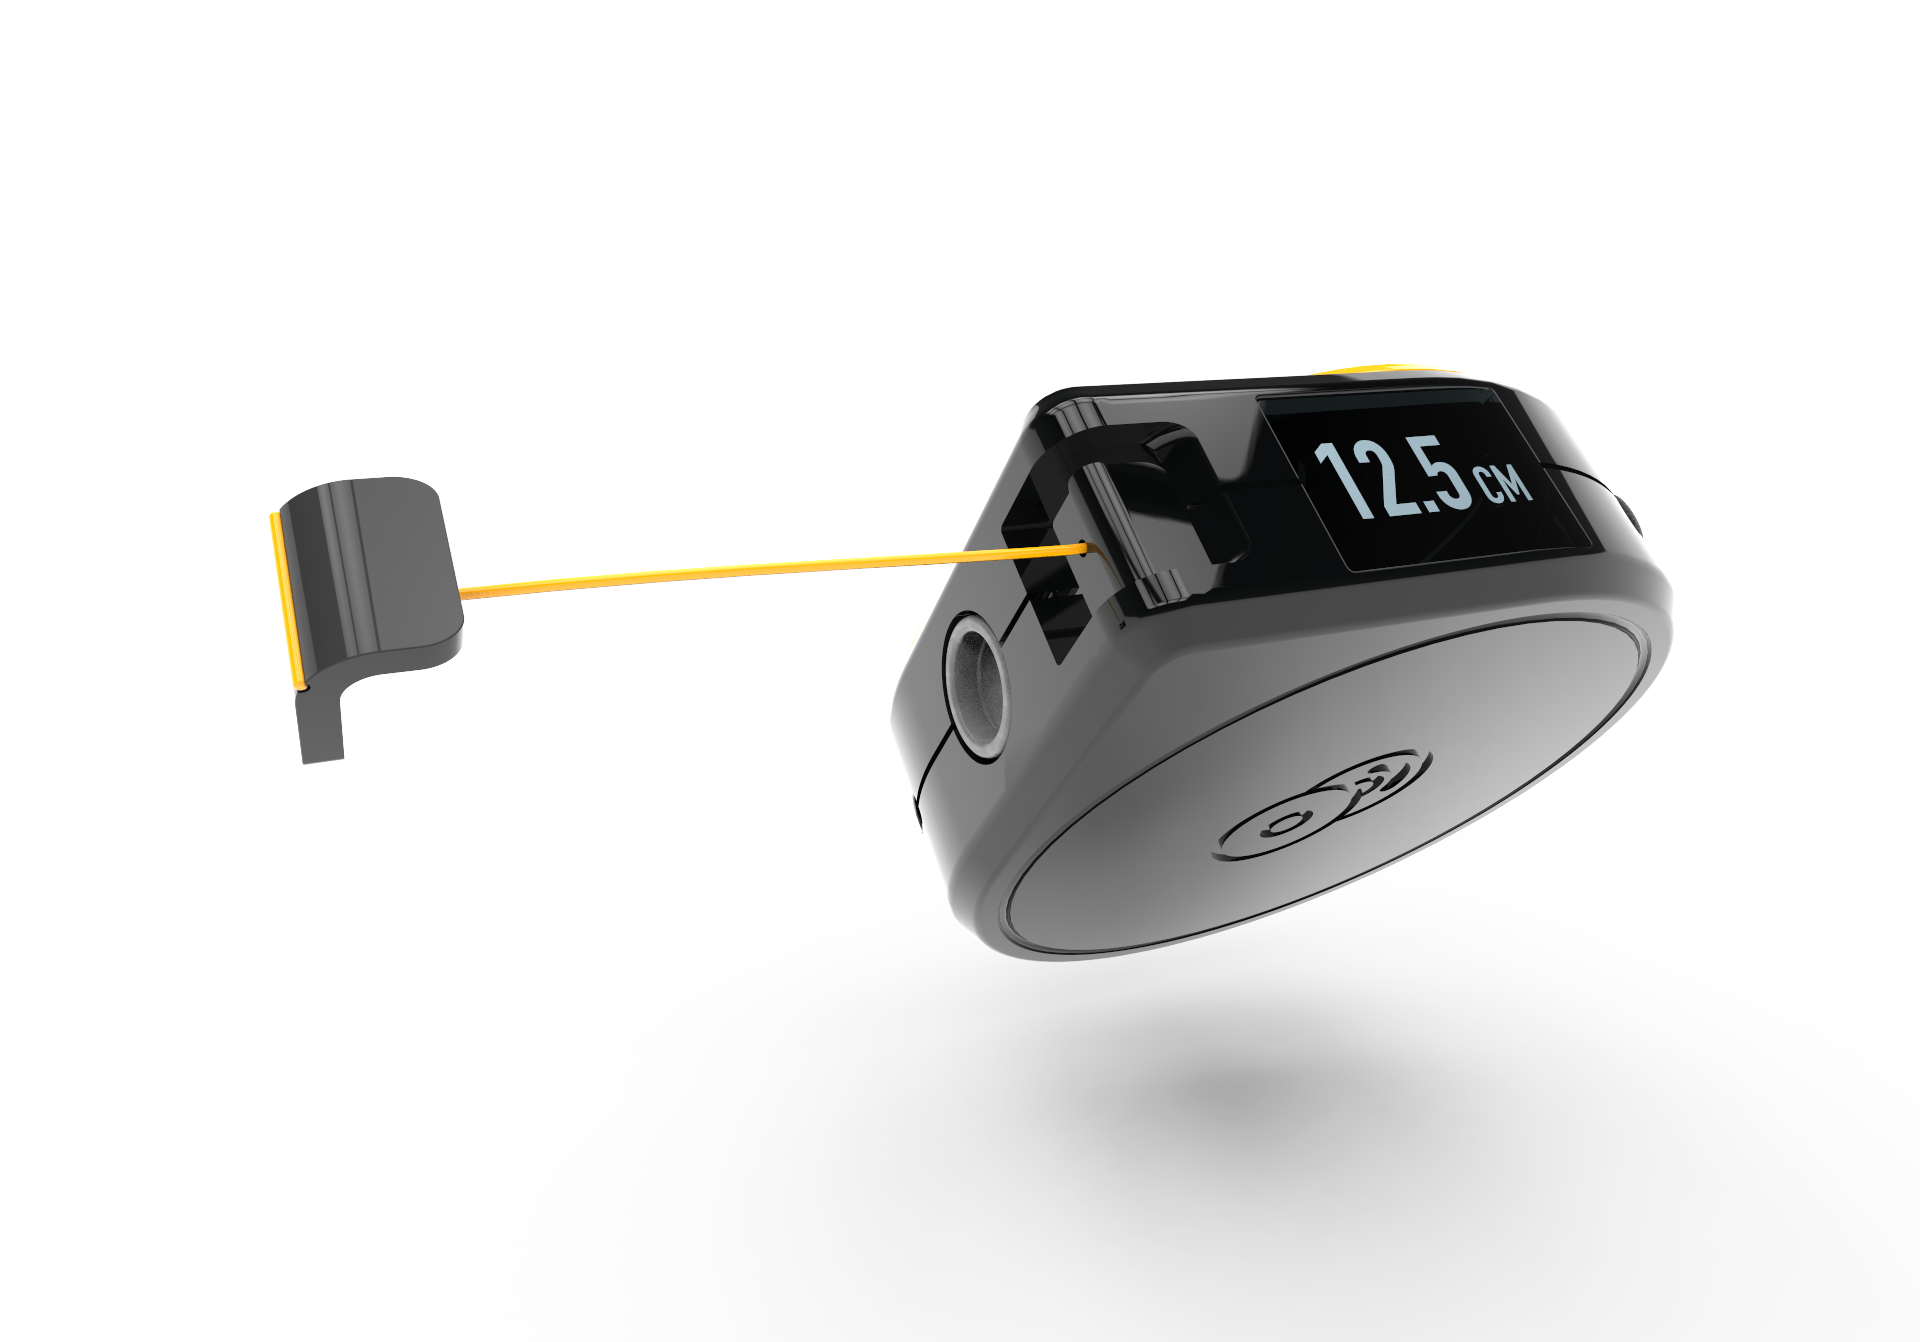 Cool Tools: New Smart Tape Measure is All of Your Favorite Measurers Rolled  into One — Construction Junkie